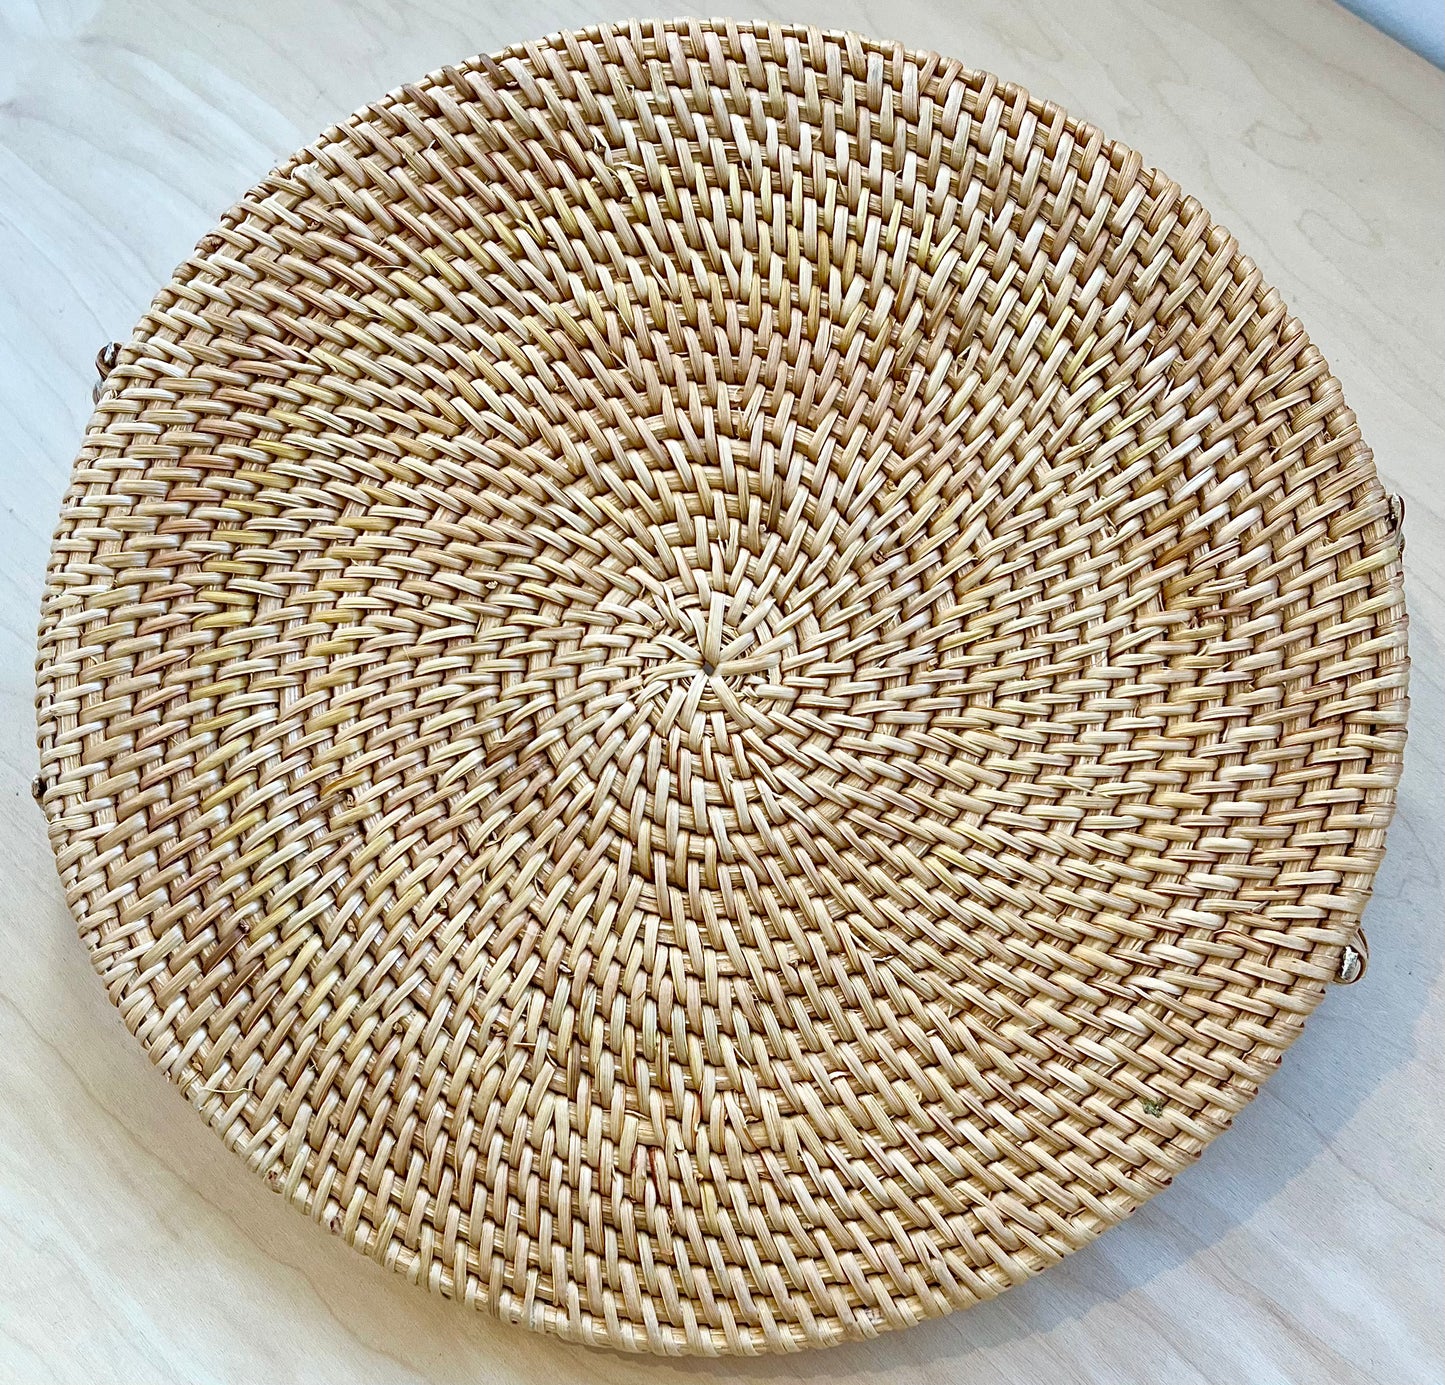 Woven Rattan Tray with Rope Handles